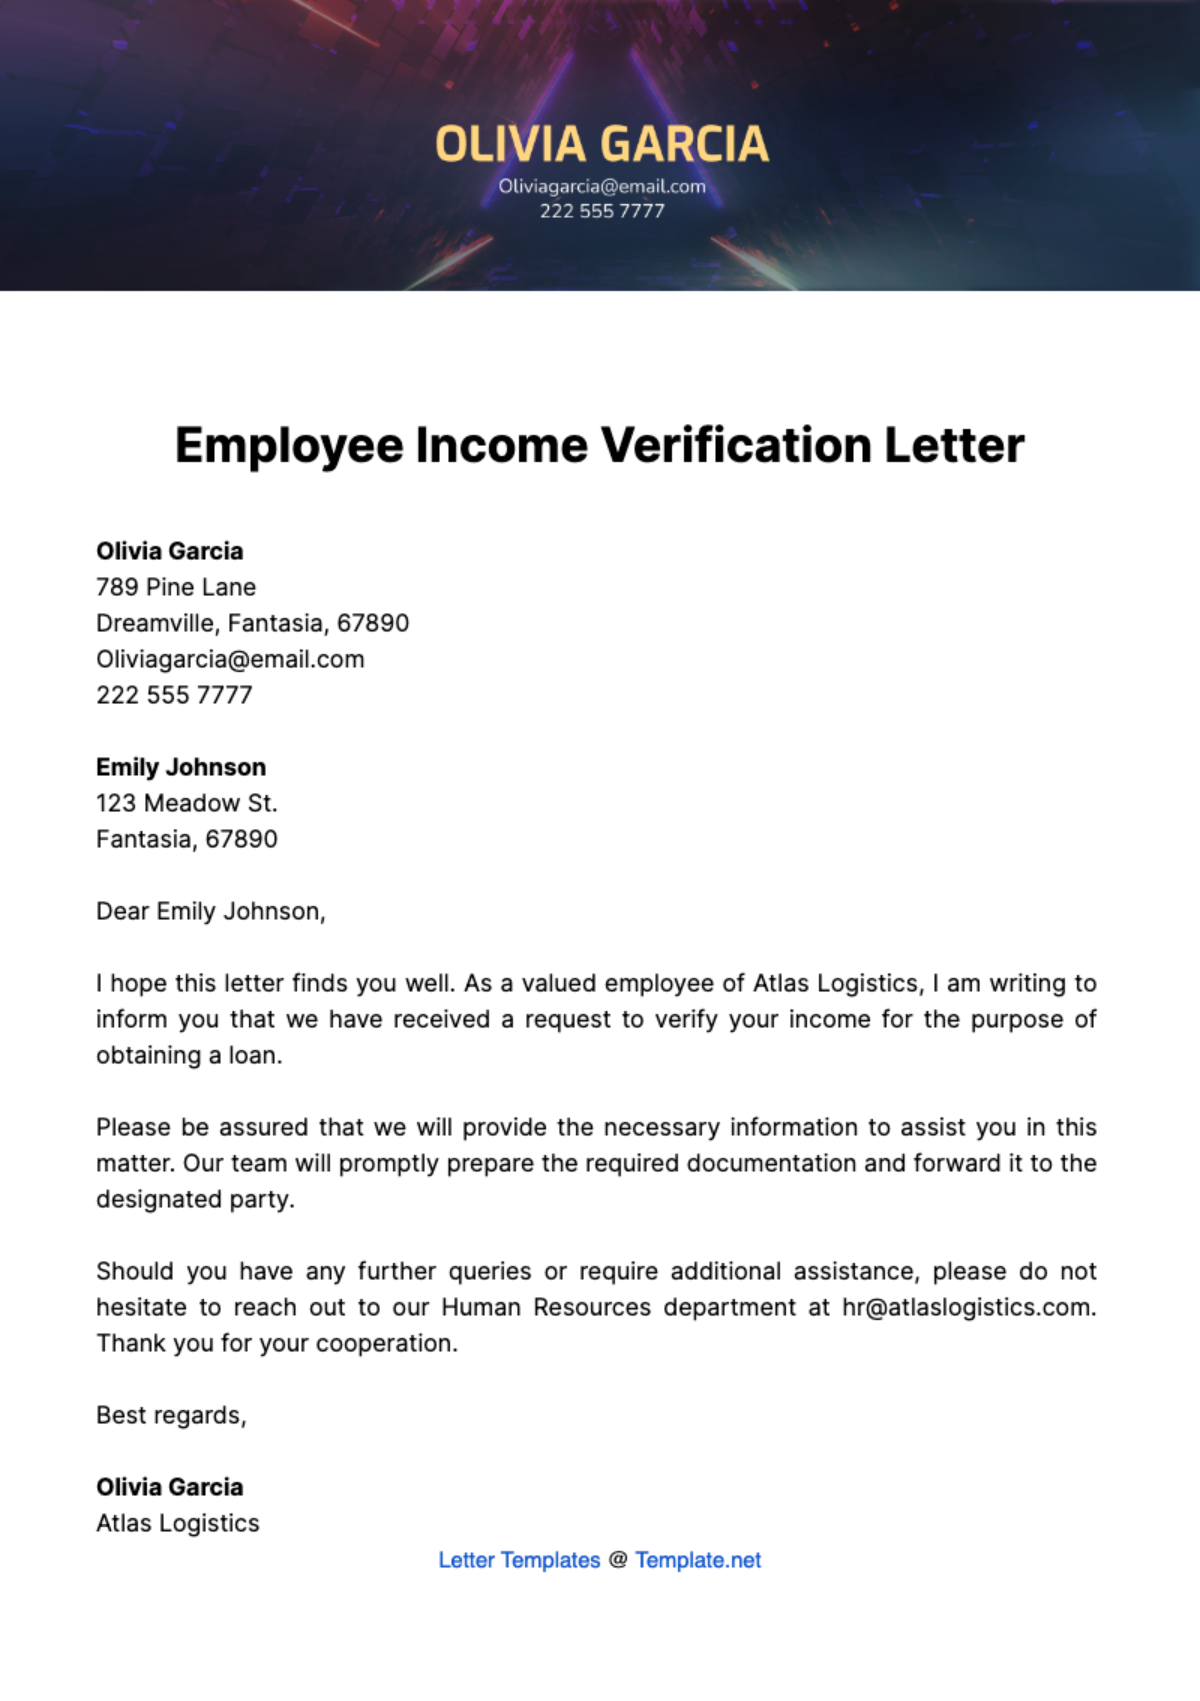 Employee Income Verification Letter Template